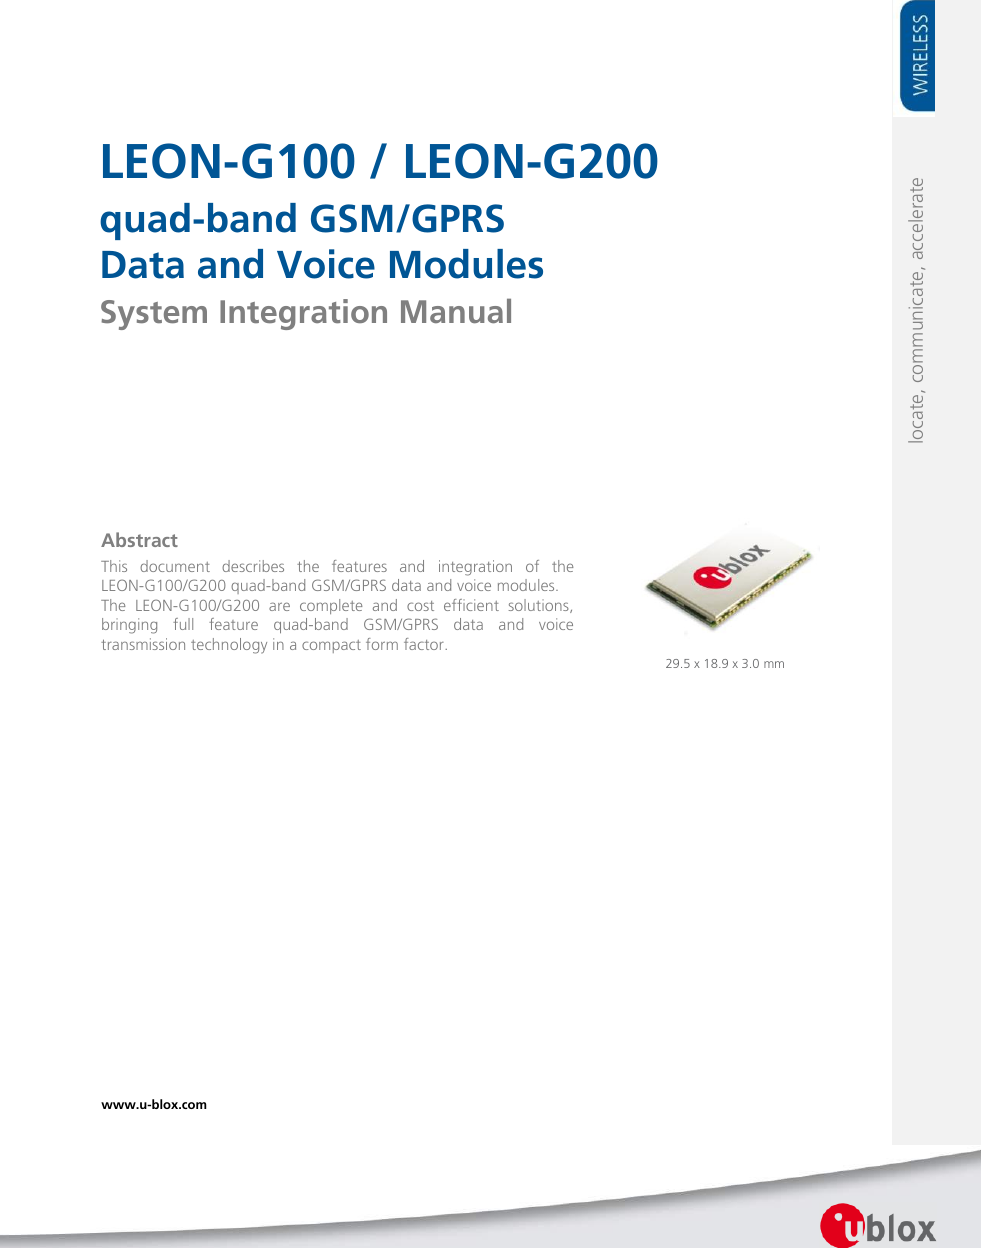     LEON-G100 / LEON-G200 quad-band GSM/GPRS Data and Voice Modules System Integration Manual            29.5 x 18.9 x 3.0 mm www.u-blox.com   locate, communicate, accelerate Abstract This  document  describes  the  features  and  integration  of  the LEON-G100/G200 quad-band GSM/GPRS data and voice modules. The  LEON-G100/G200  are  complete  and  cost  efficient  solutions, bringing  full  feature  quad-band  GSM/GPRS  data  and  voice transmission technology in a compact form factor.  